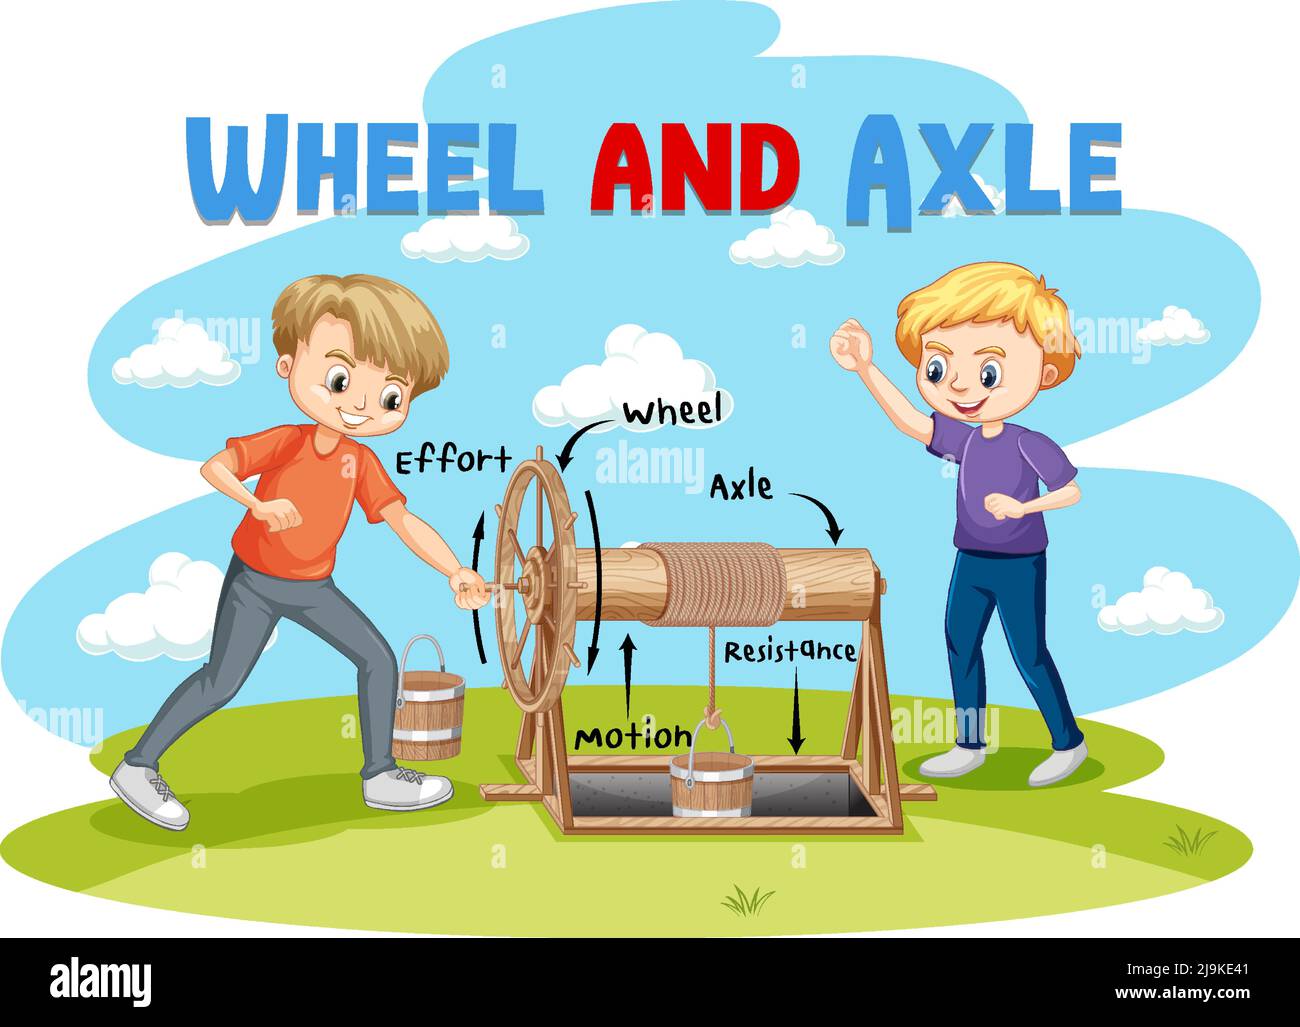 Two boys doing experiment on wheel and axle illustration Stock Vector